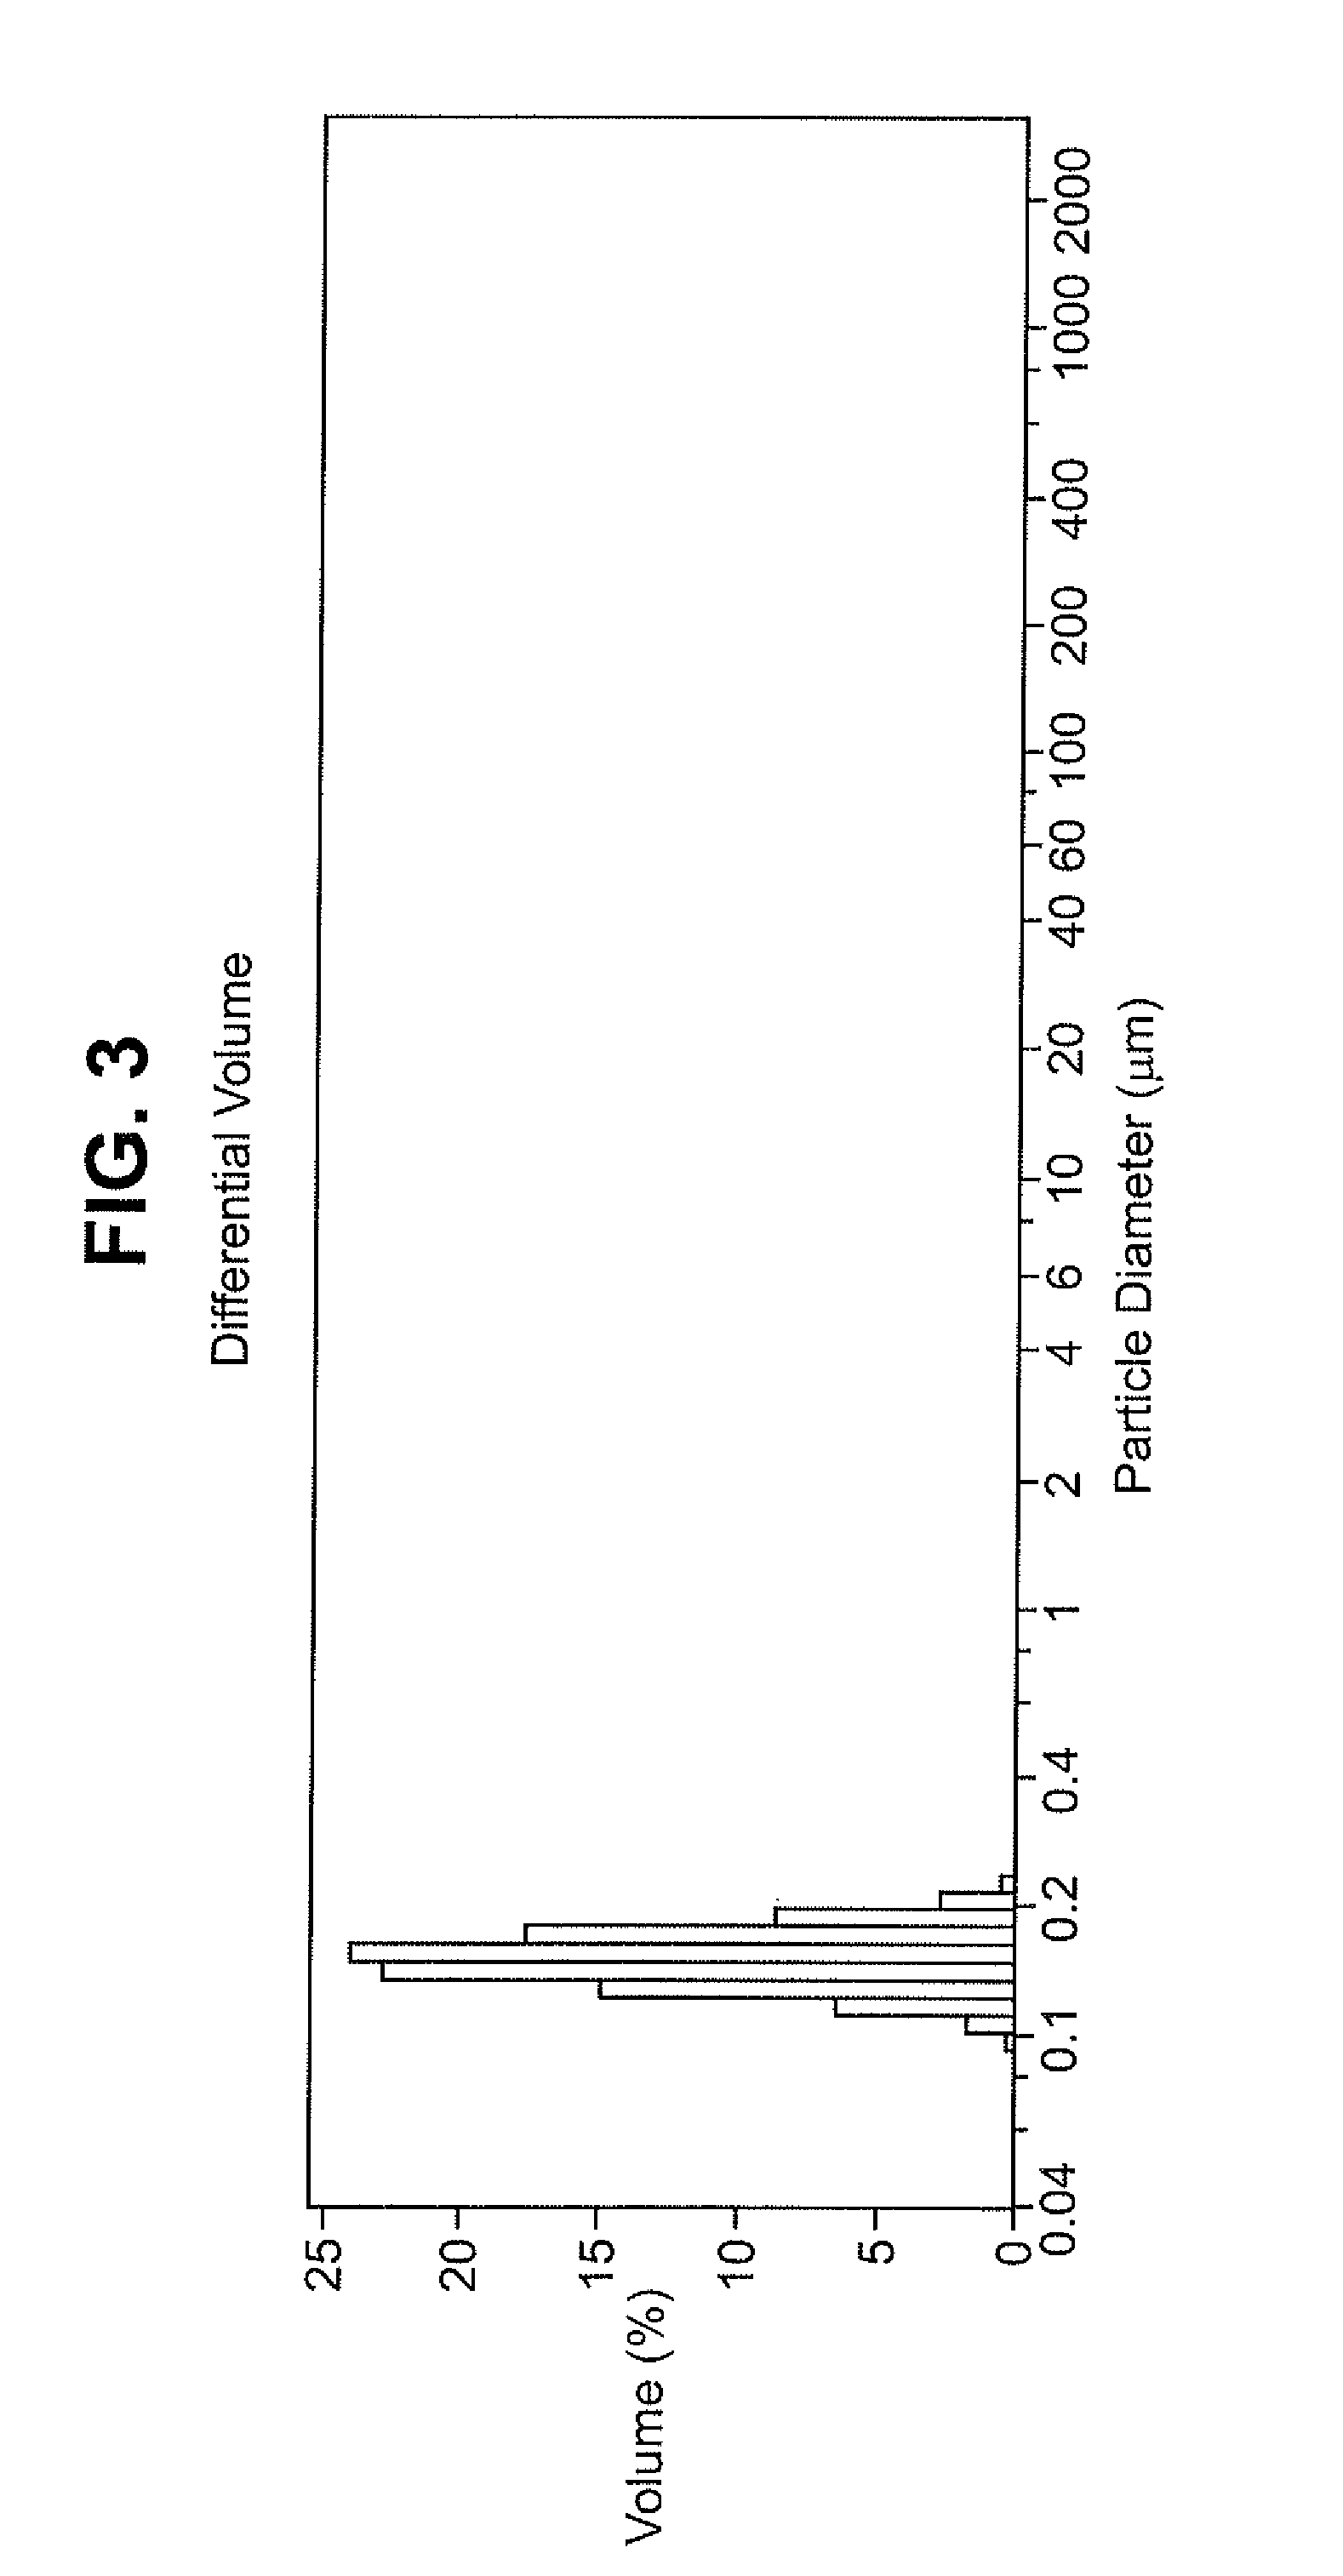 Redispersible polymer powders stabilized with protective colloid compositions